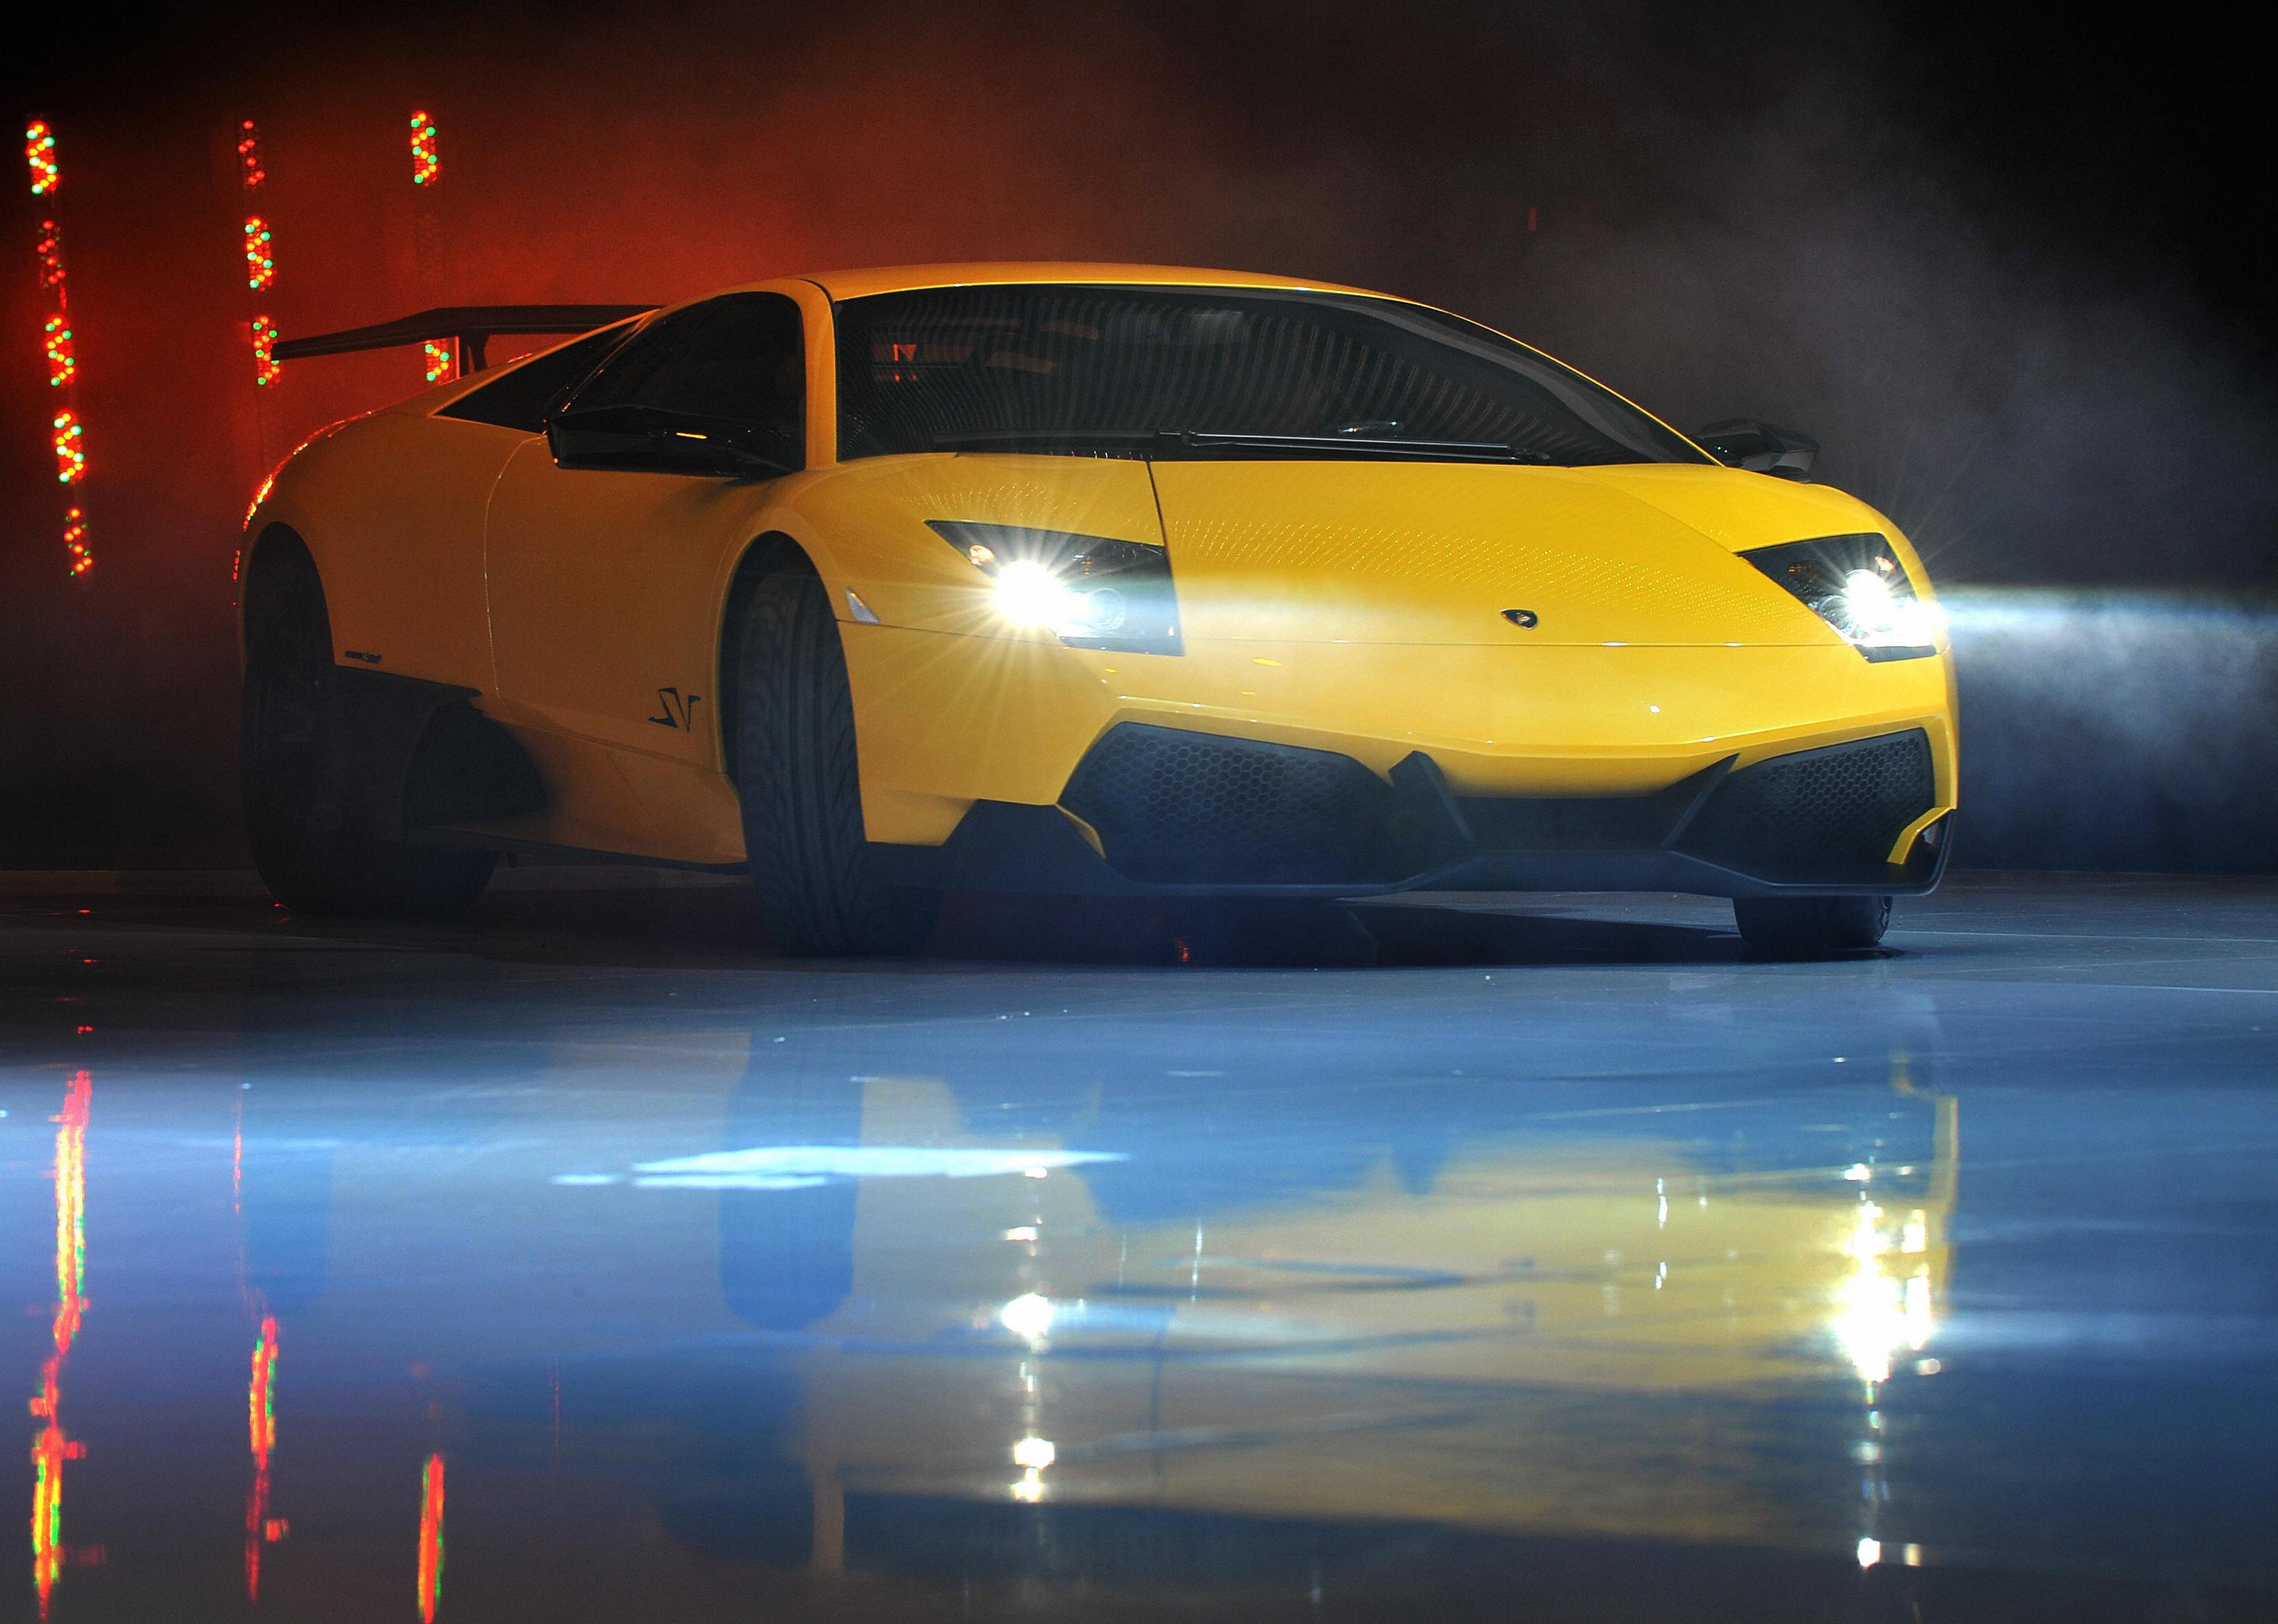 The new Lamborghini Murcielago LP 670- 4 SuperVeloce displayed during a preview of the Volkswagen group.